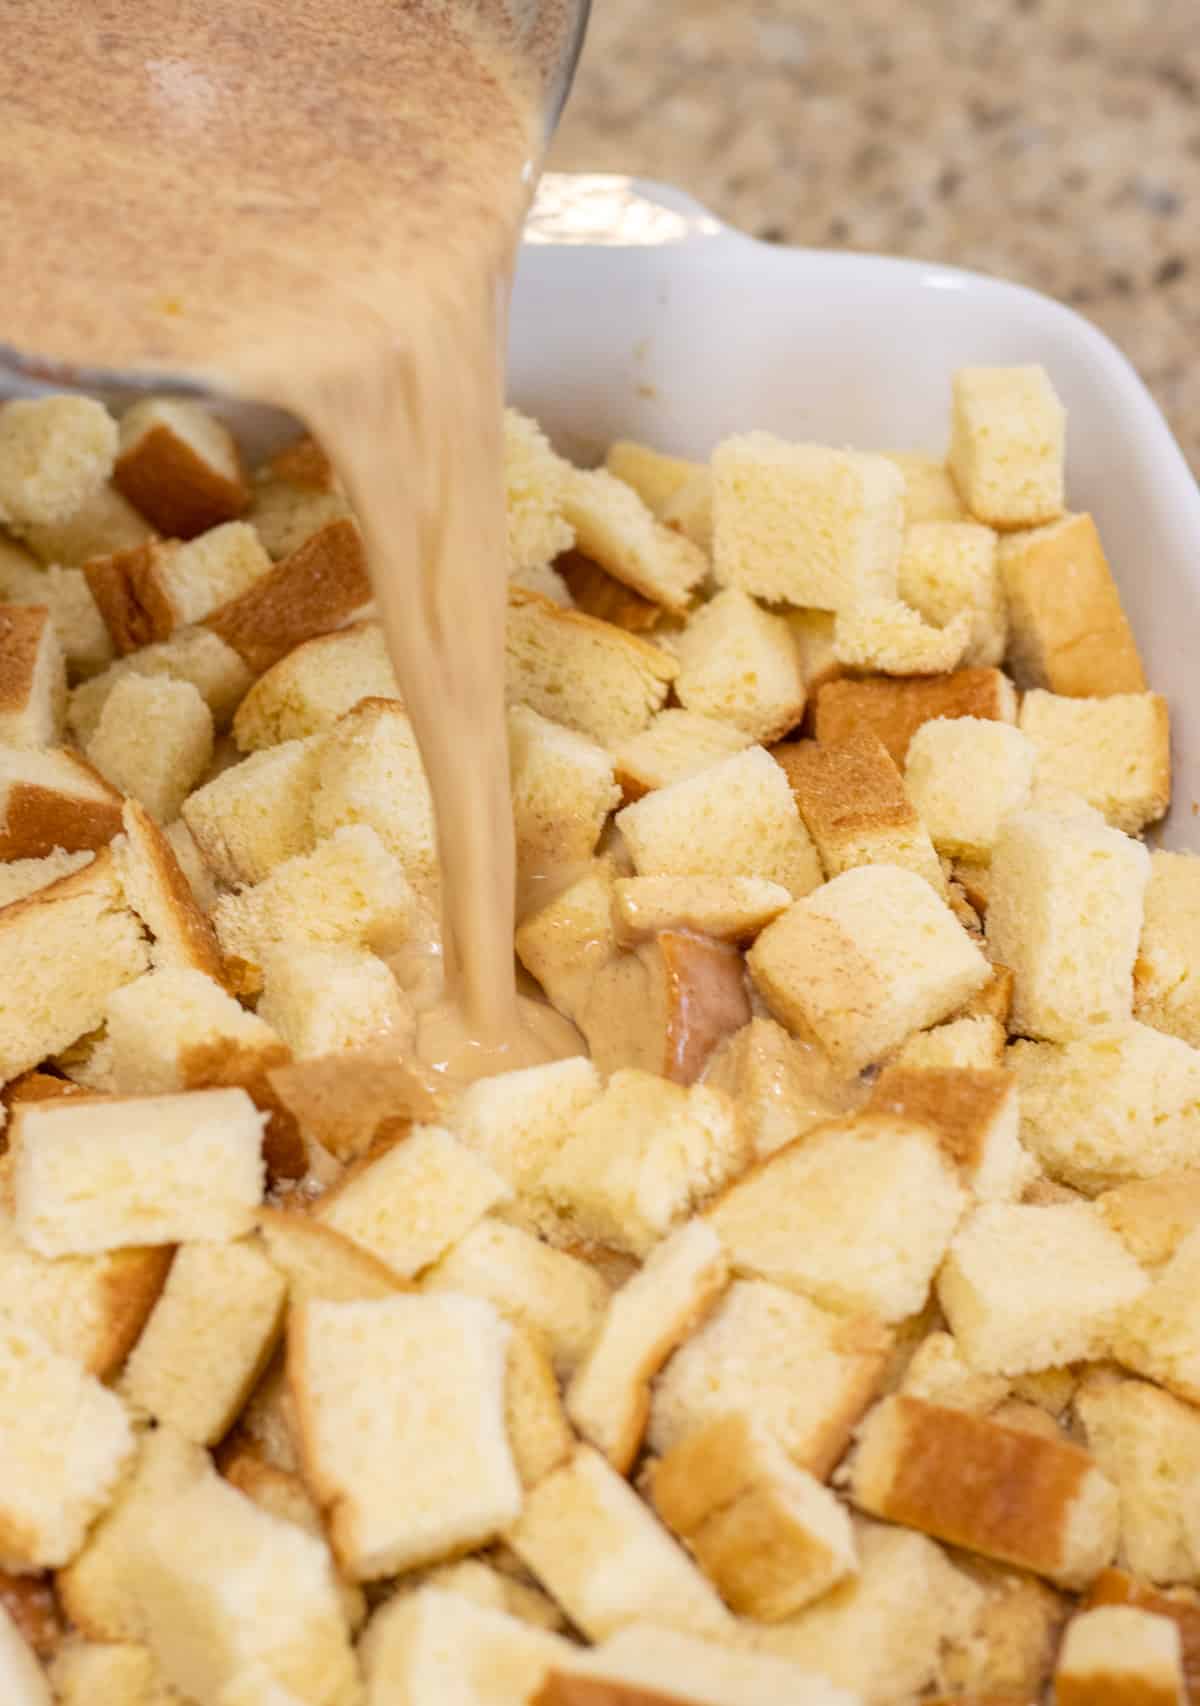 Custard being poured into bread cubes.